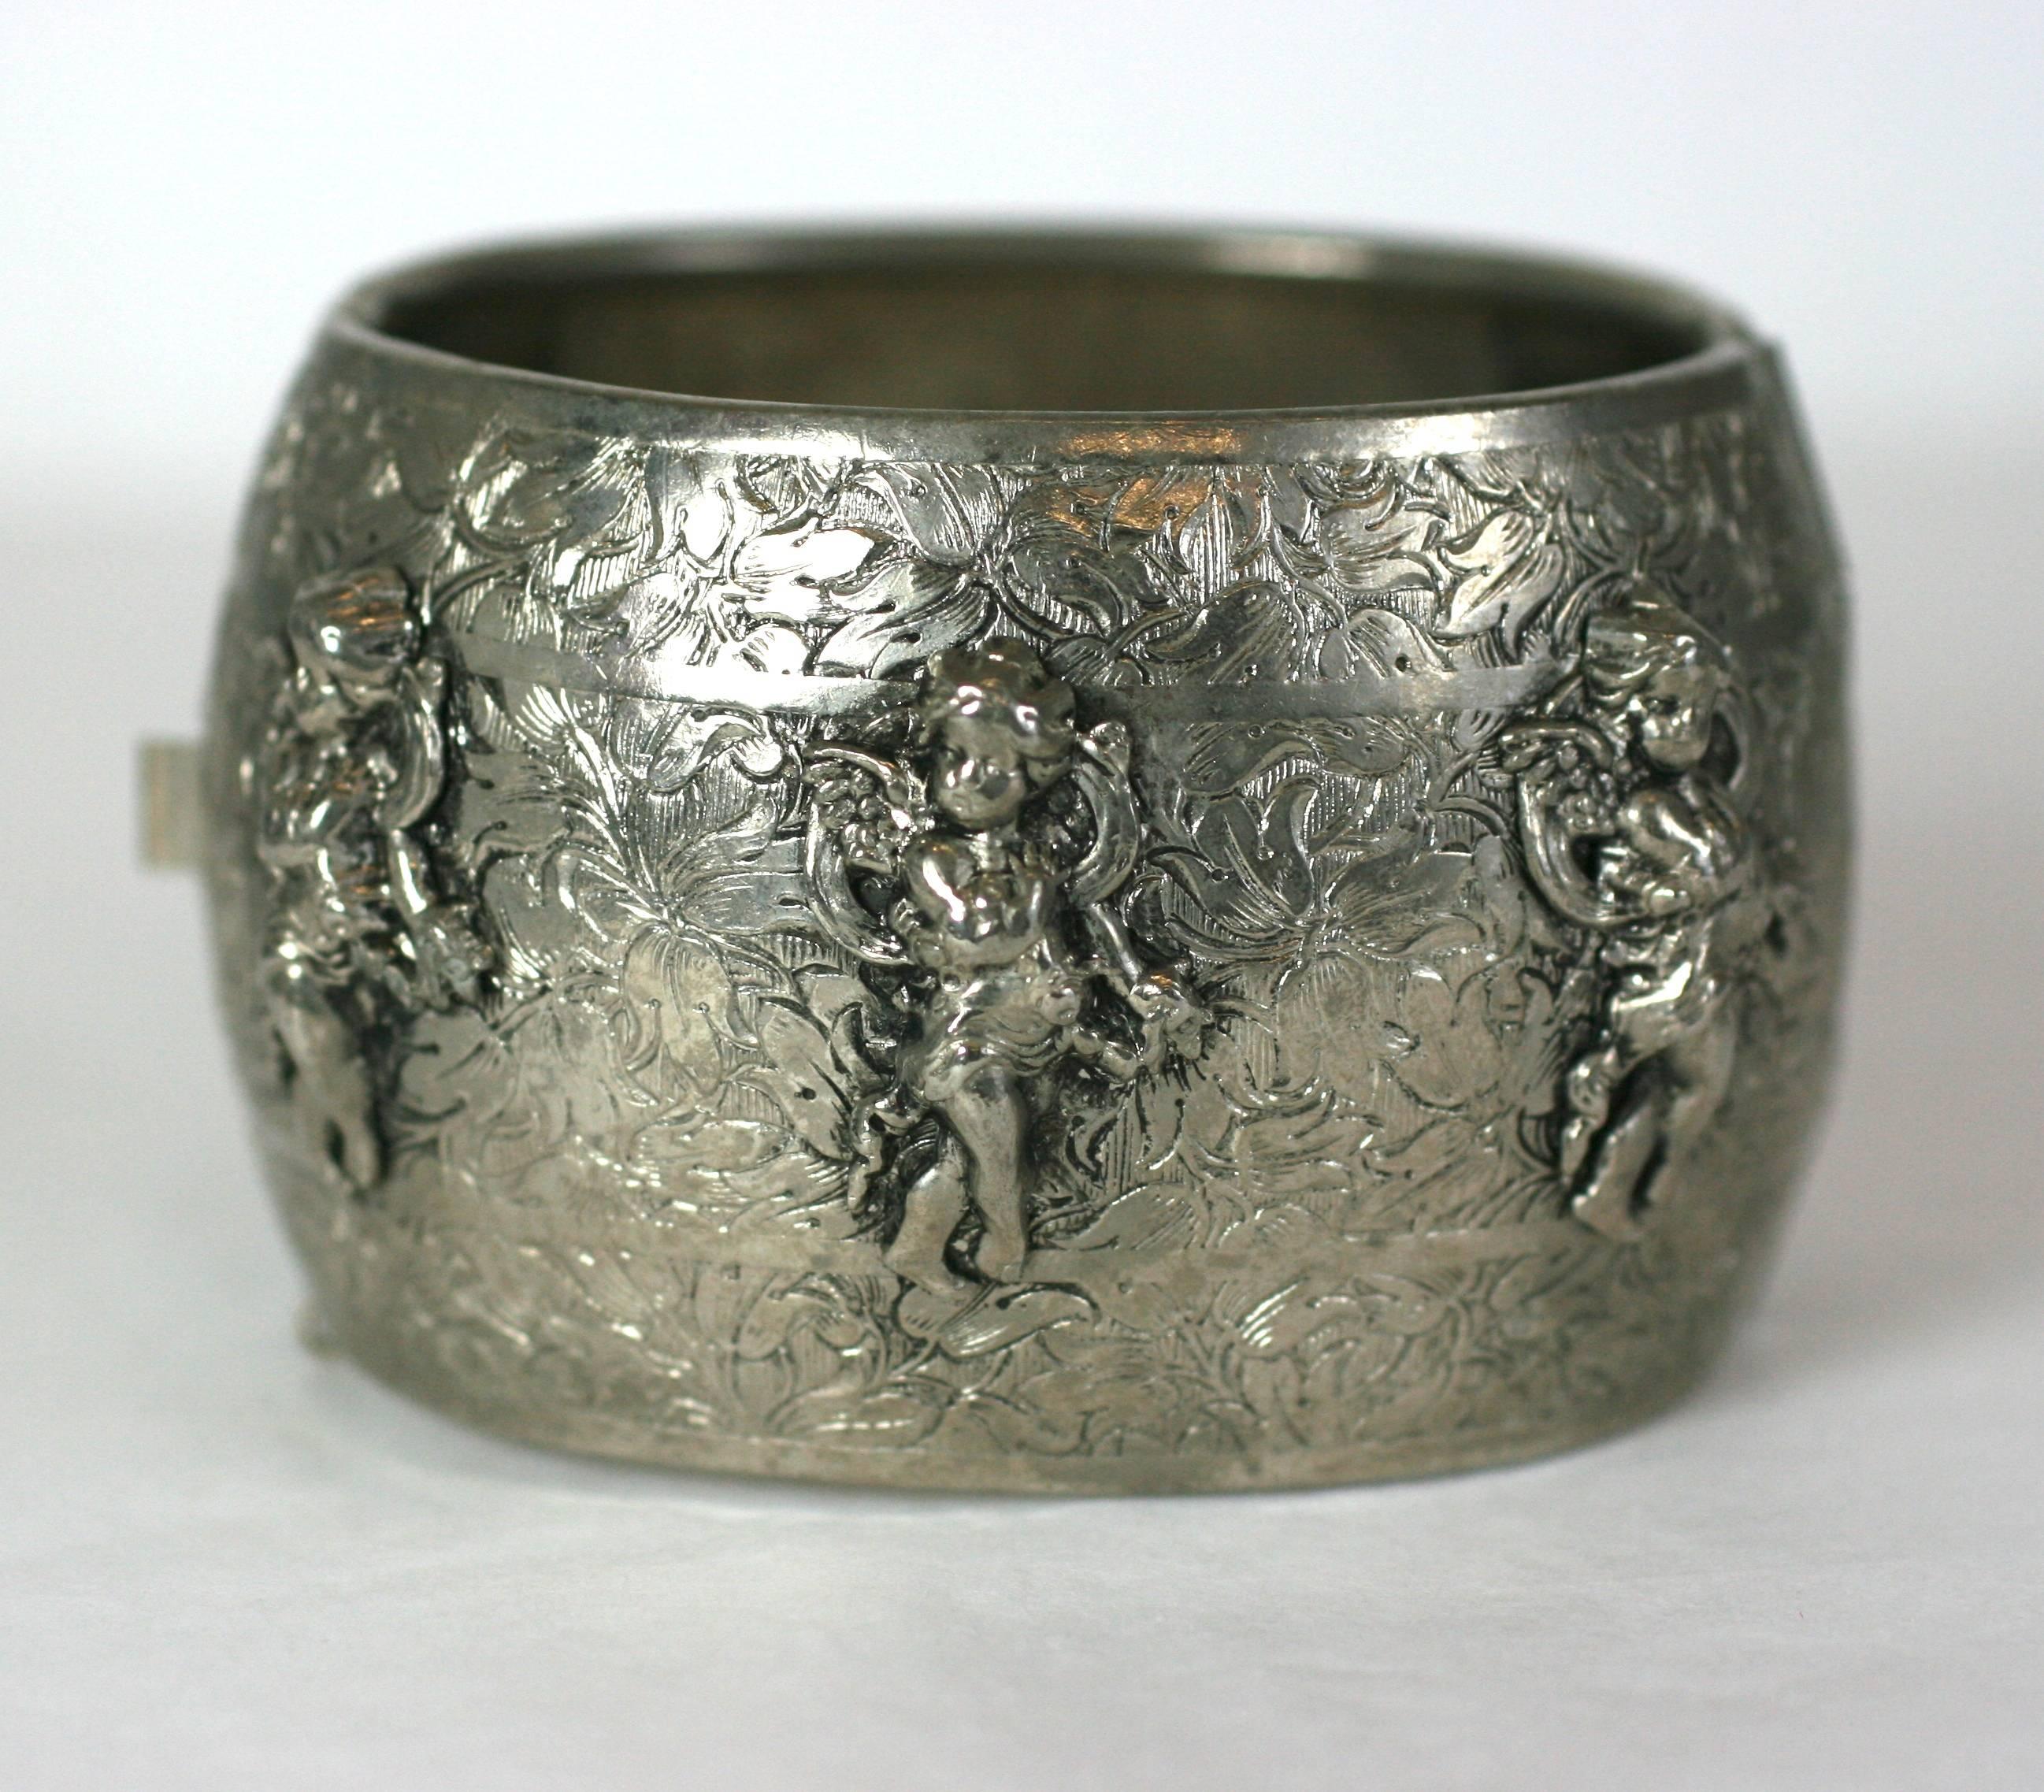 Frederich Putti decorated bombe hinged cuff bracelet of antiqued silvered metal etched with a scrolling floral motif. The finely detailed cherubs draped in ribbon garlands and bows. Hinged closure with safety chain. 1950 USA. 
Excellent  Condition.